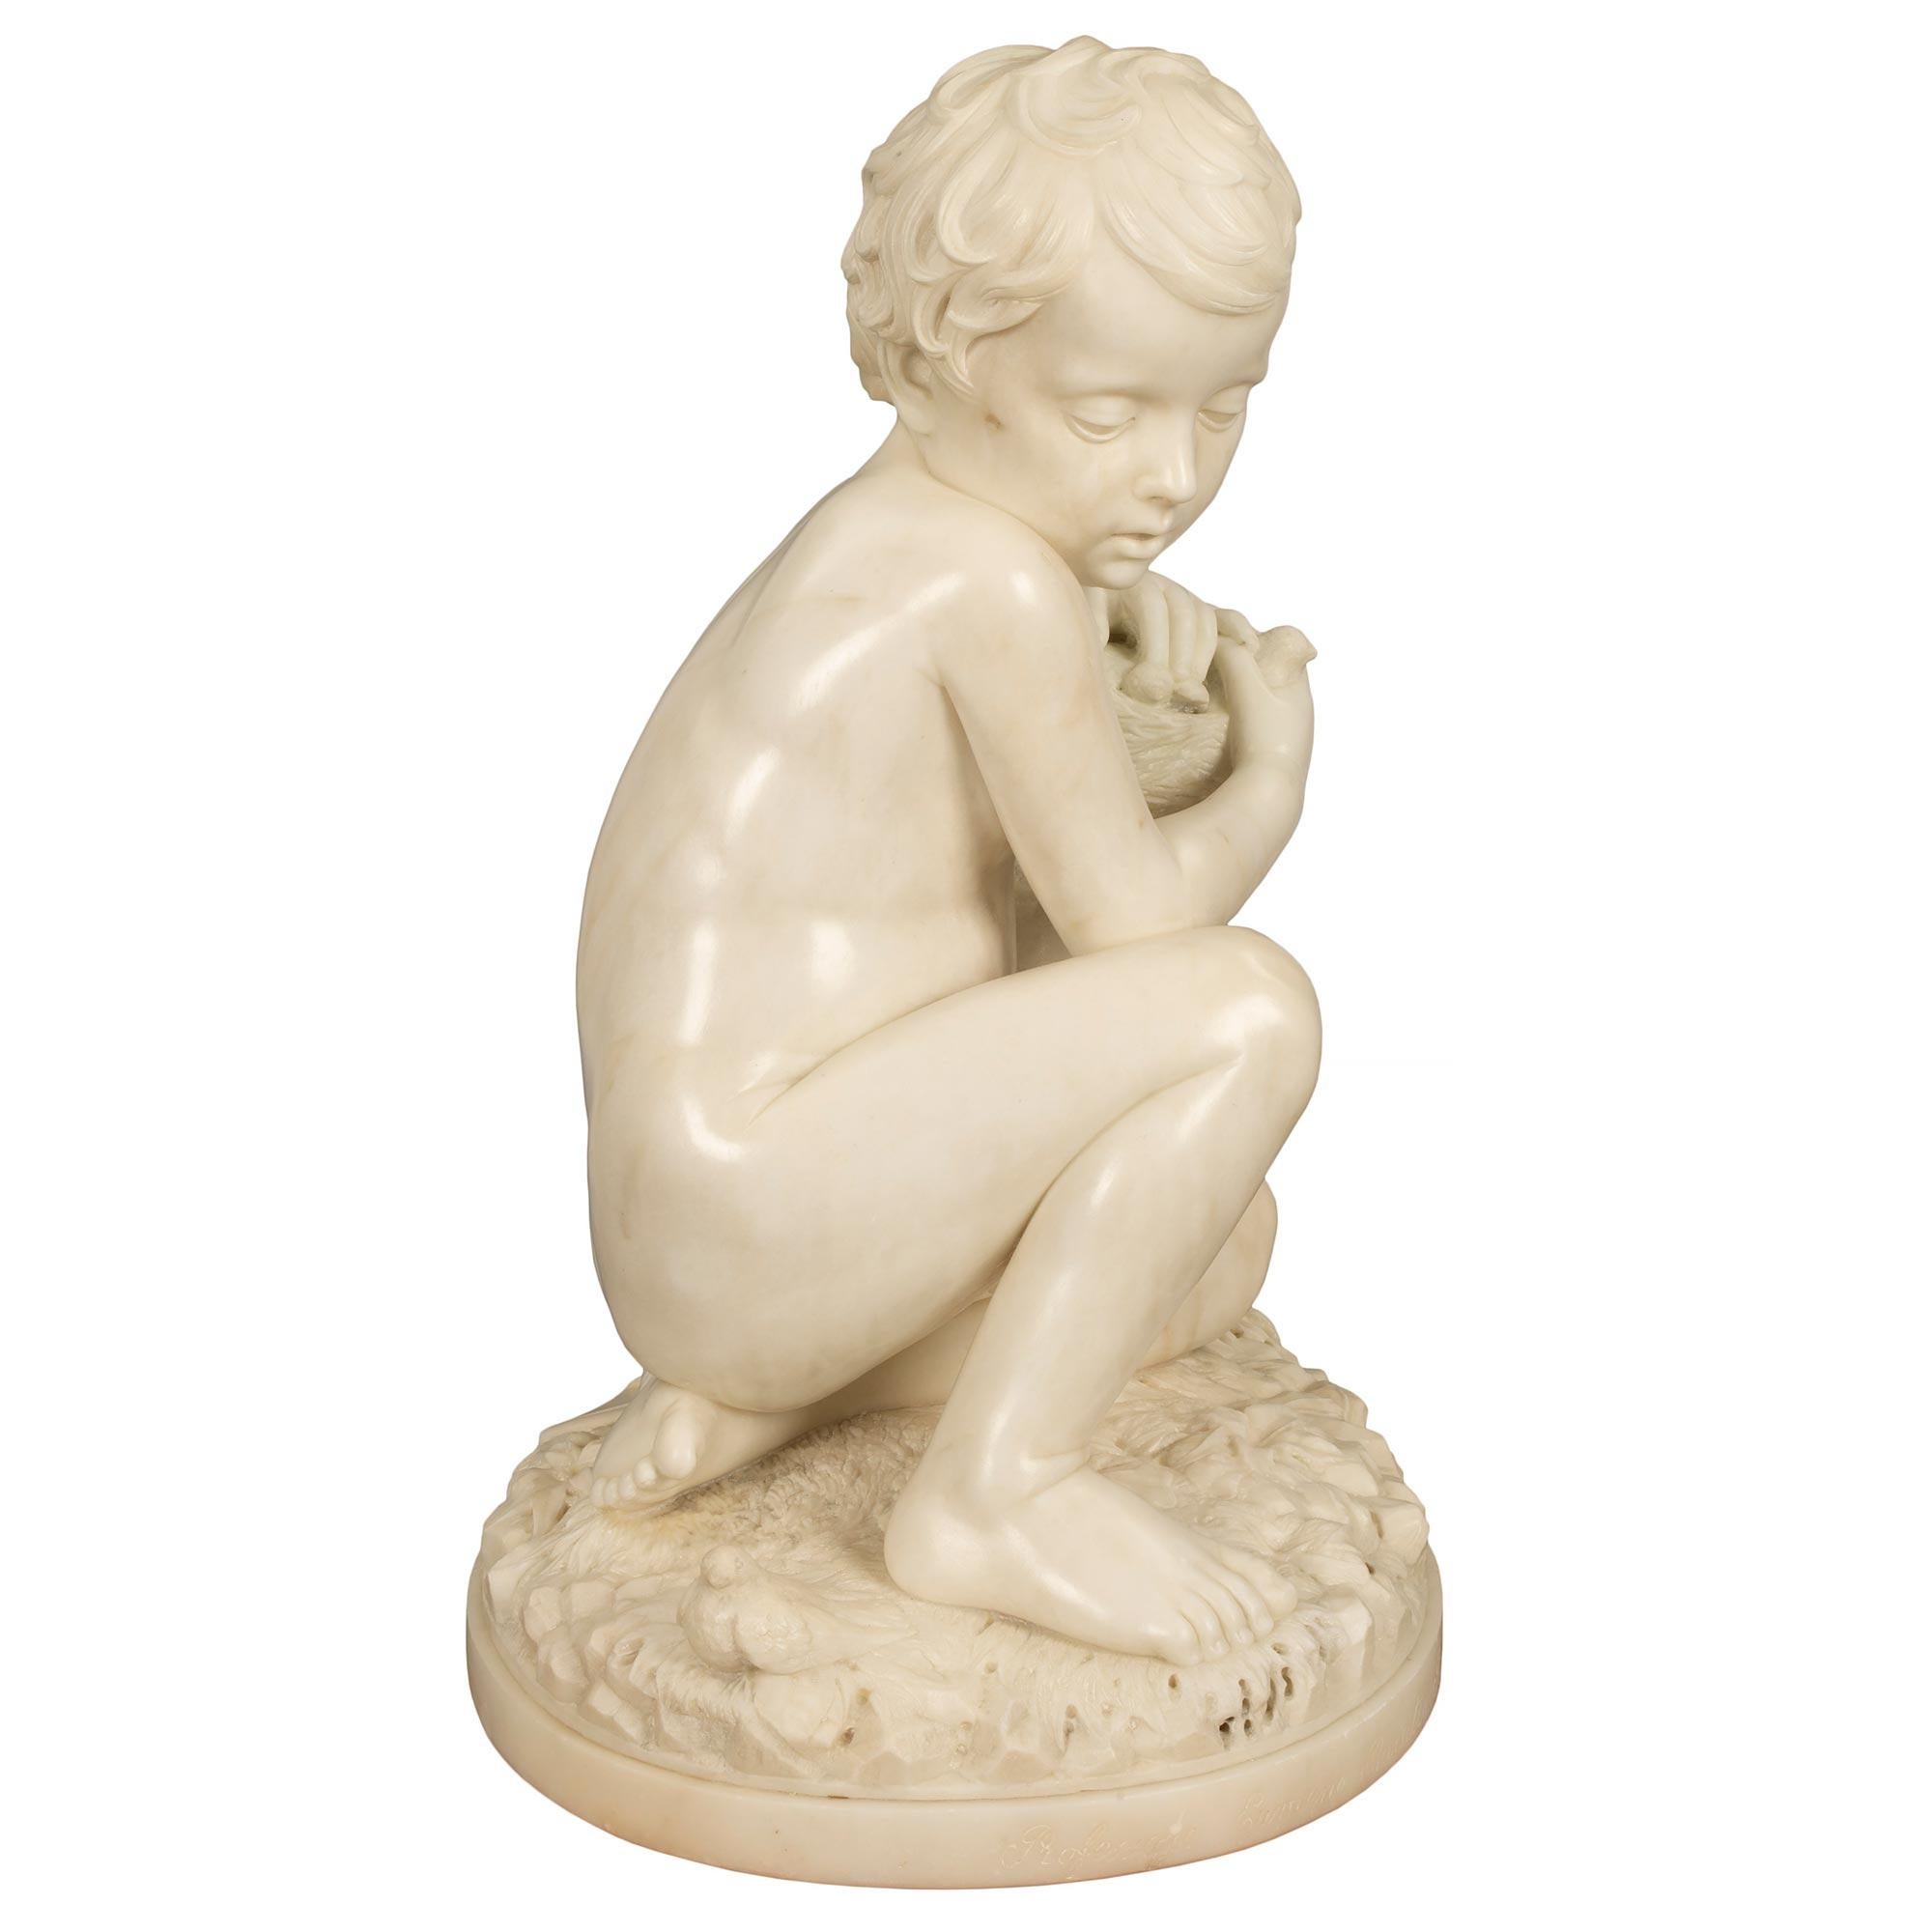 Italian 19th Century White Carrara Marble Signed Statue of a Young Boy In Good Condition For Sale In West Palm Beach, FL